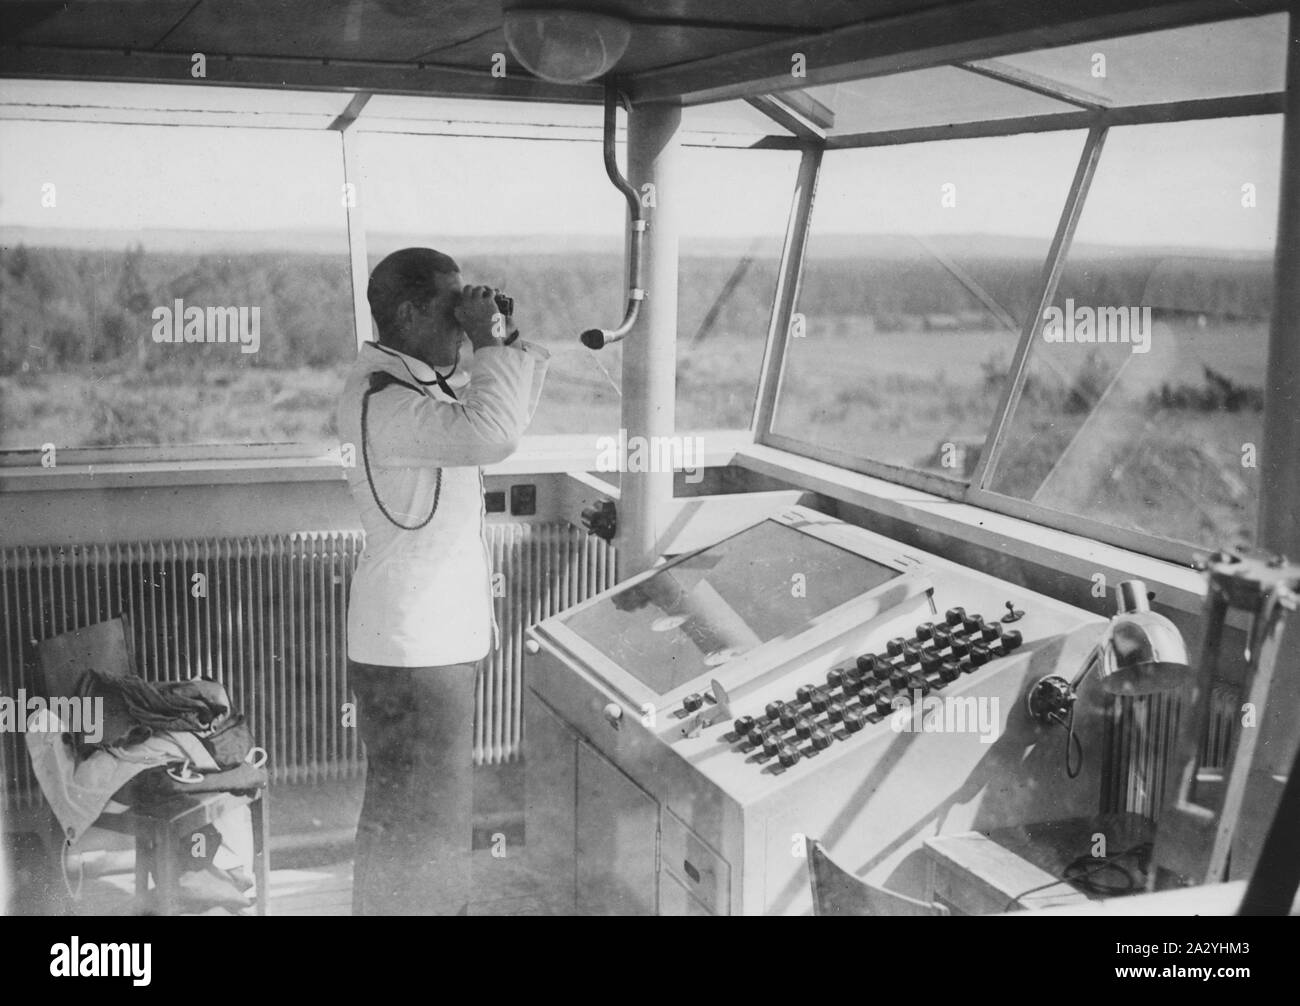 Air traffic controller in the 1930s. An officer in the airport control tower is monitoring the runway with binoculars. Bromma airport Stockholm. The airport that was opened for traffic may 23 1936. Stock Photo